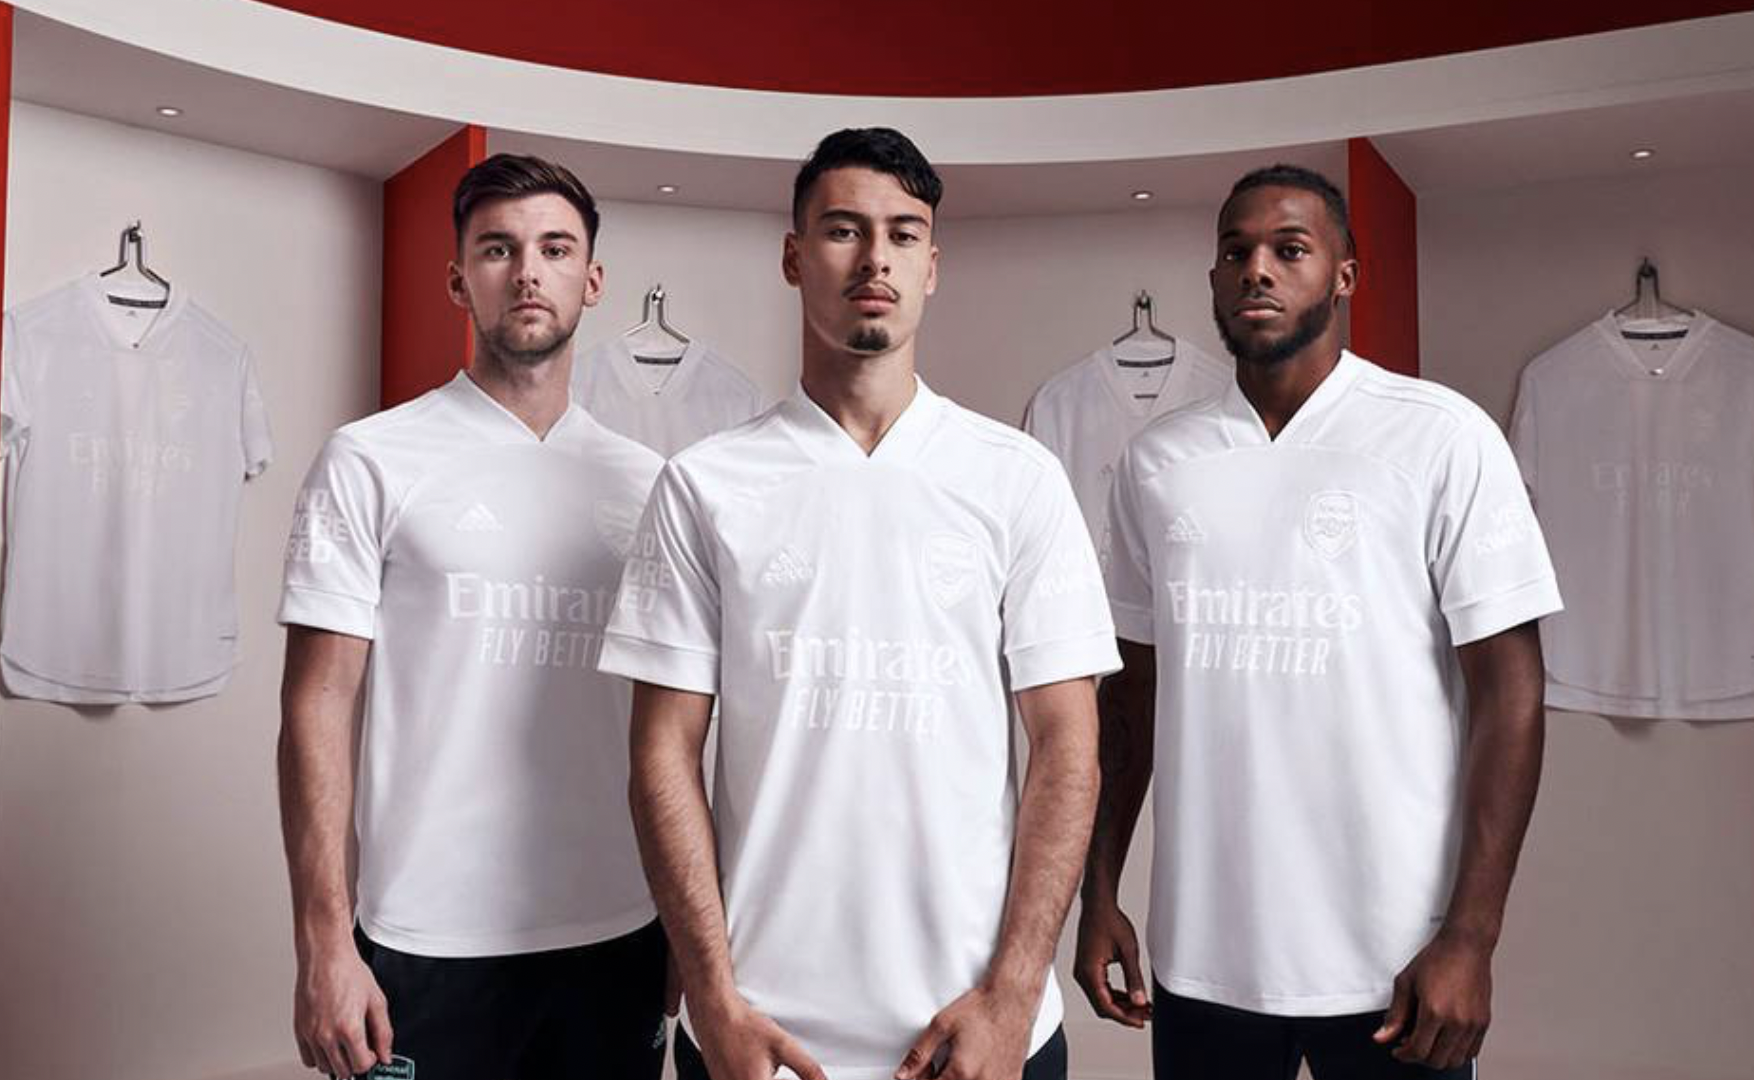 No More Red: Arsenal to don all white Adidas at Forest in bid to help fight London knife crime 